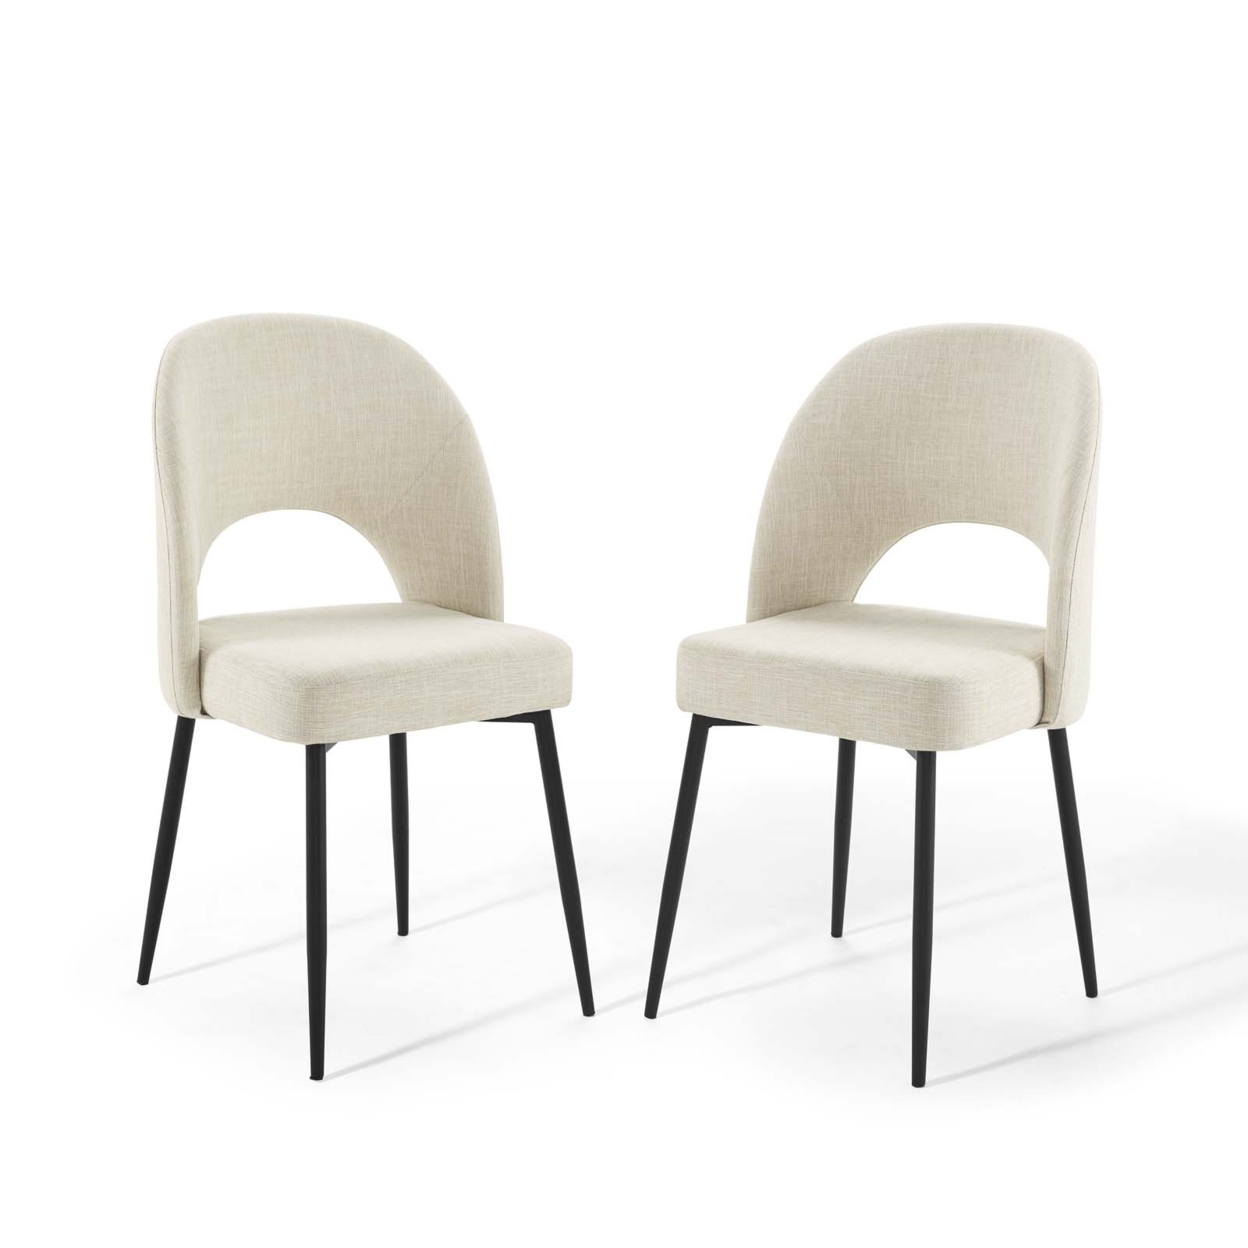 Rouse Dining Side Chair Upholstered Fabric Set Of 2, Black Beige